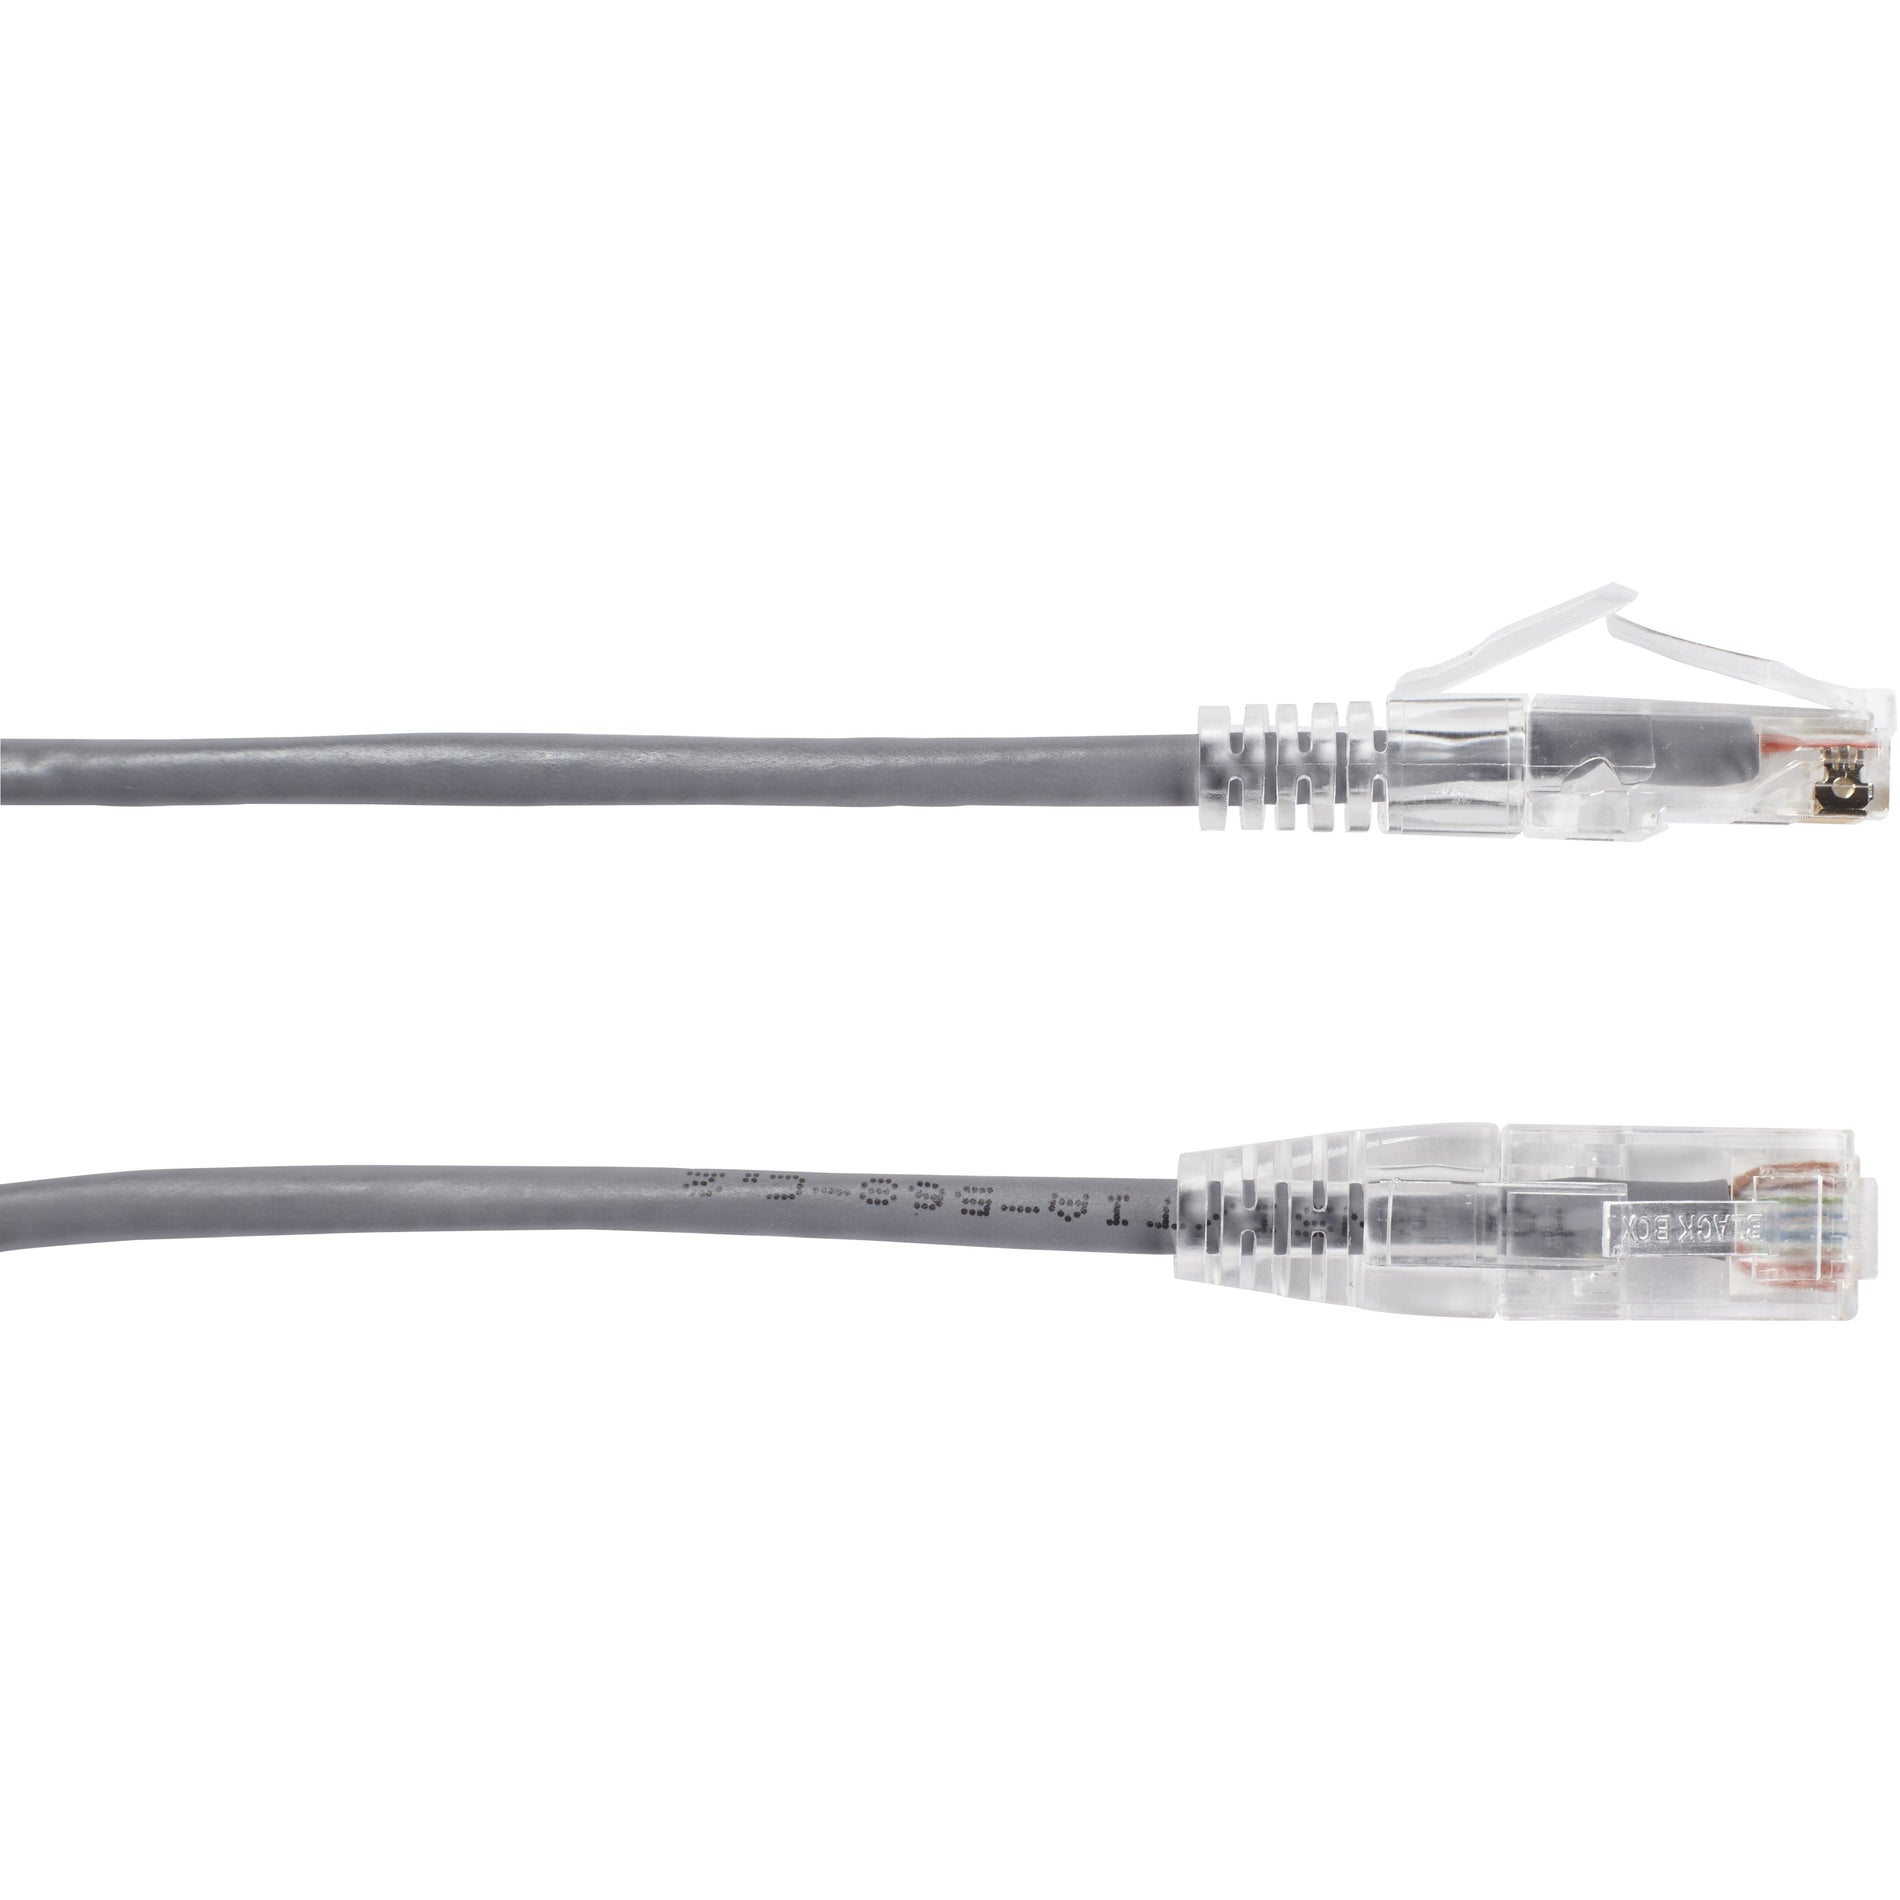 Black Box C6APC28-GY-15 Slim-Net Cat.6a UTP Patch Network Cable, 15 ft, Snagless Boot, 10 Gbit/s Data Transfer Rate